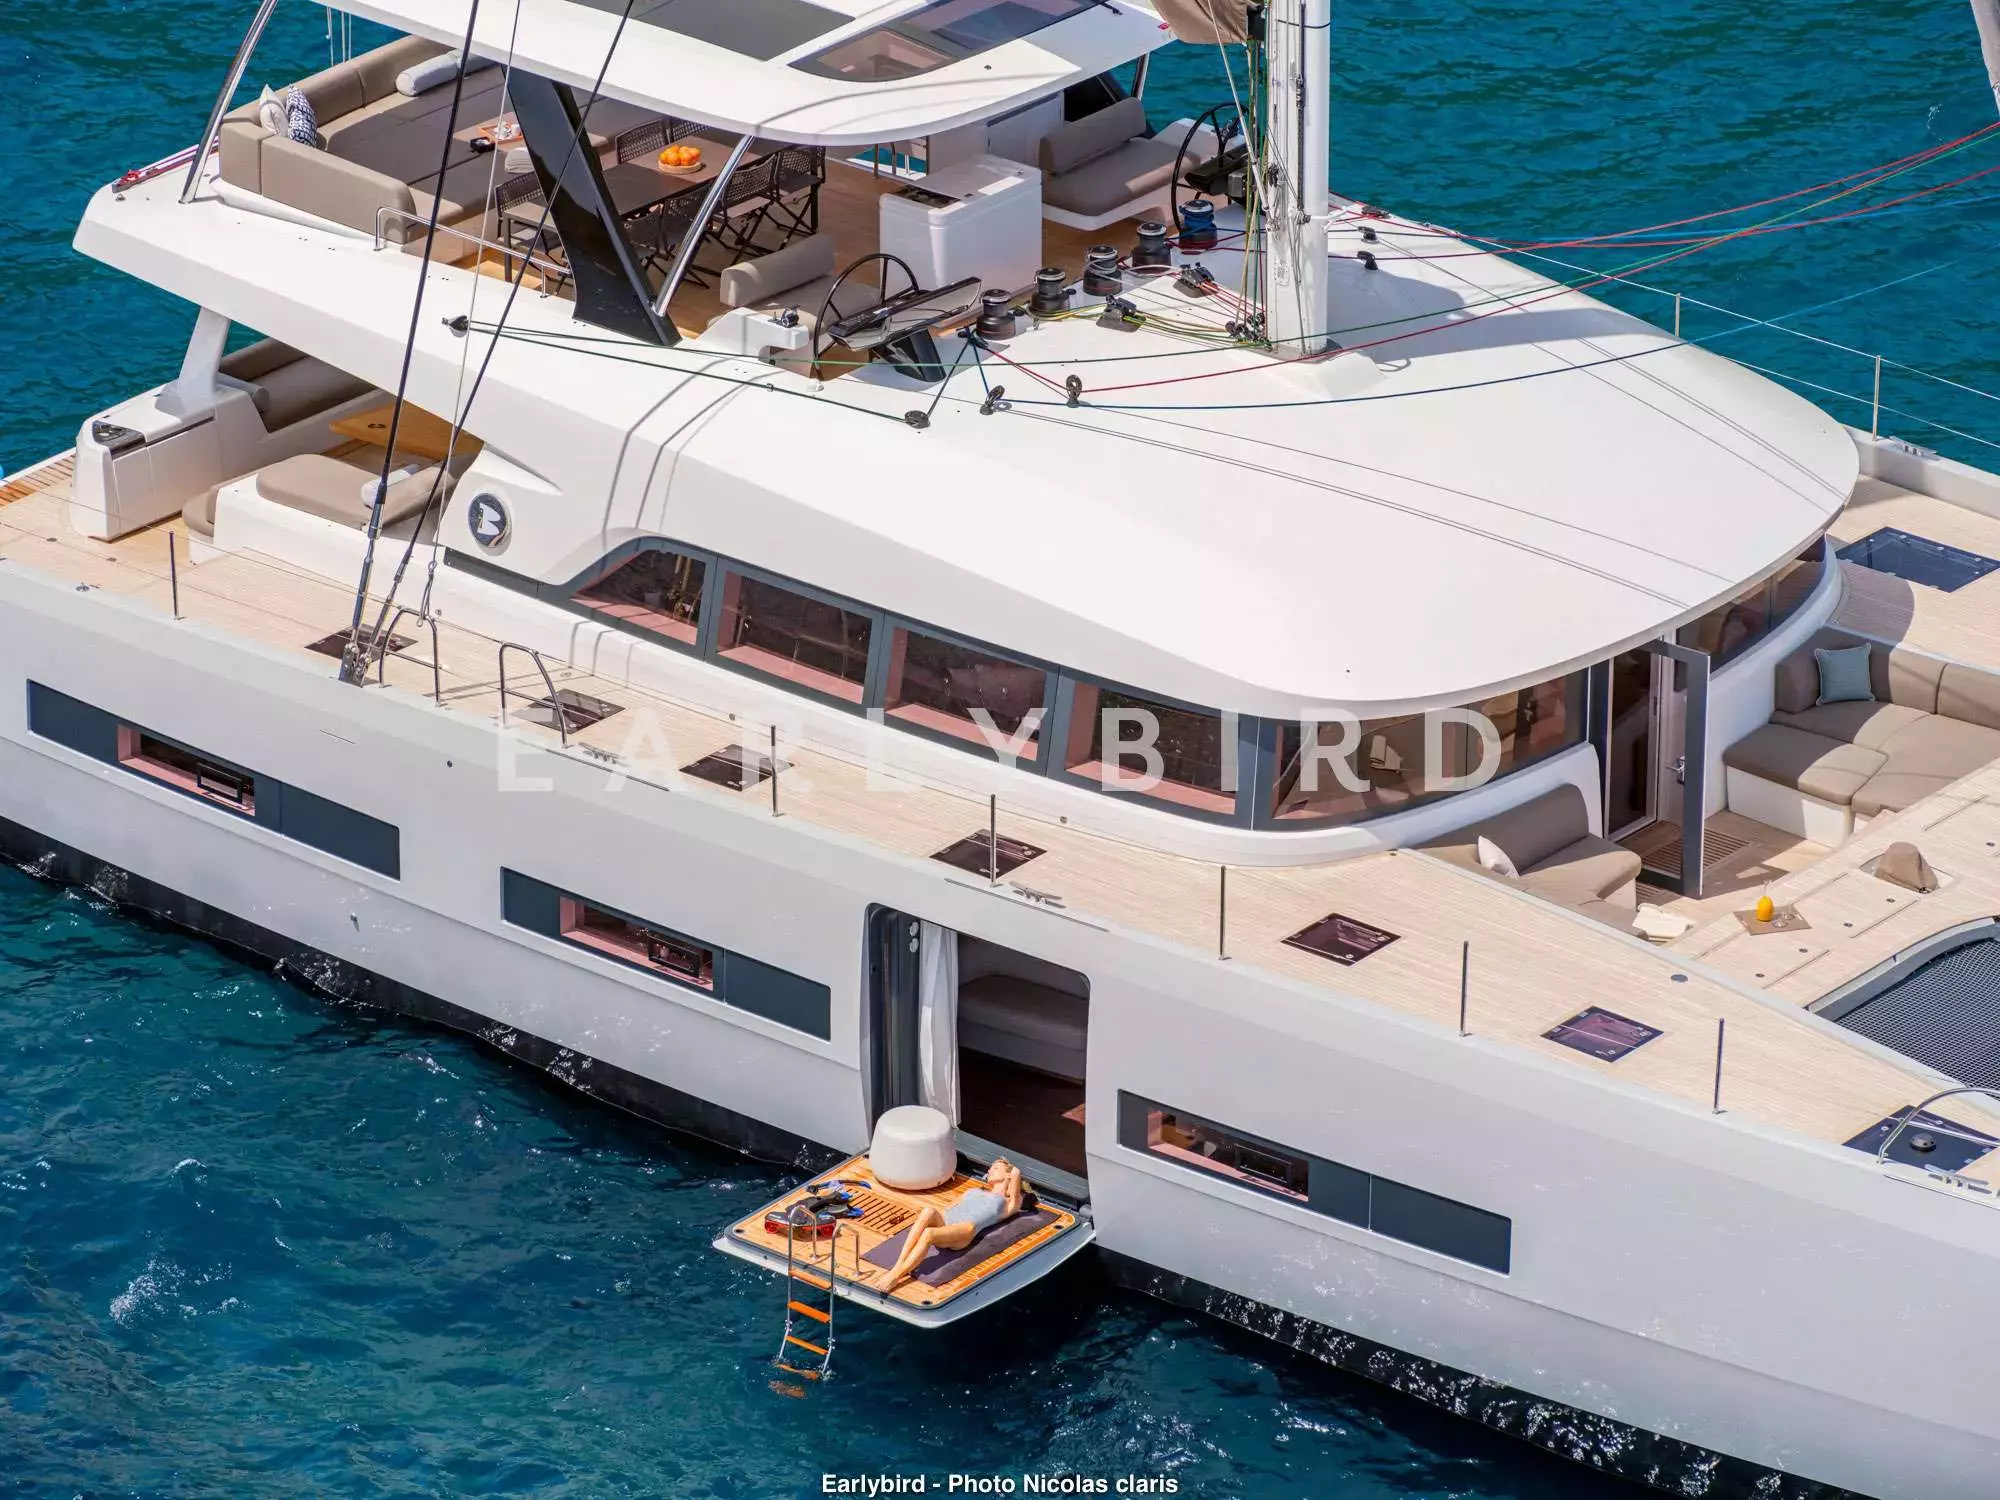 Earlybird by Lagoon - Top rates for a Charter of a private Luxury Catamaran in Grenadines